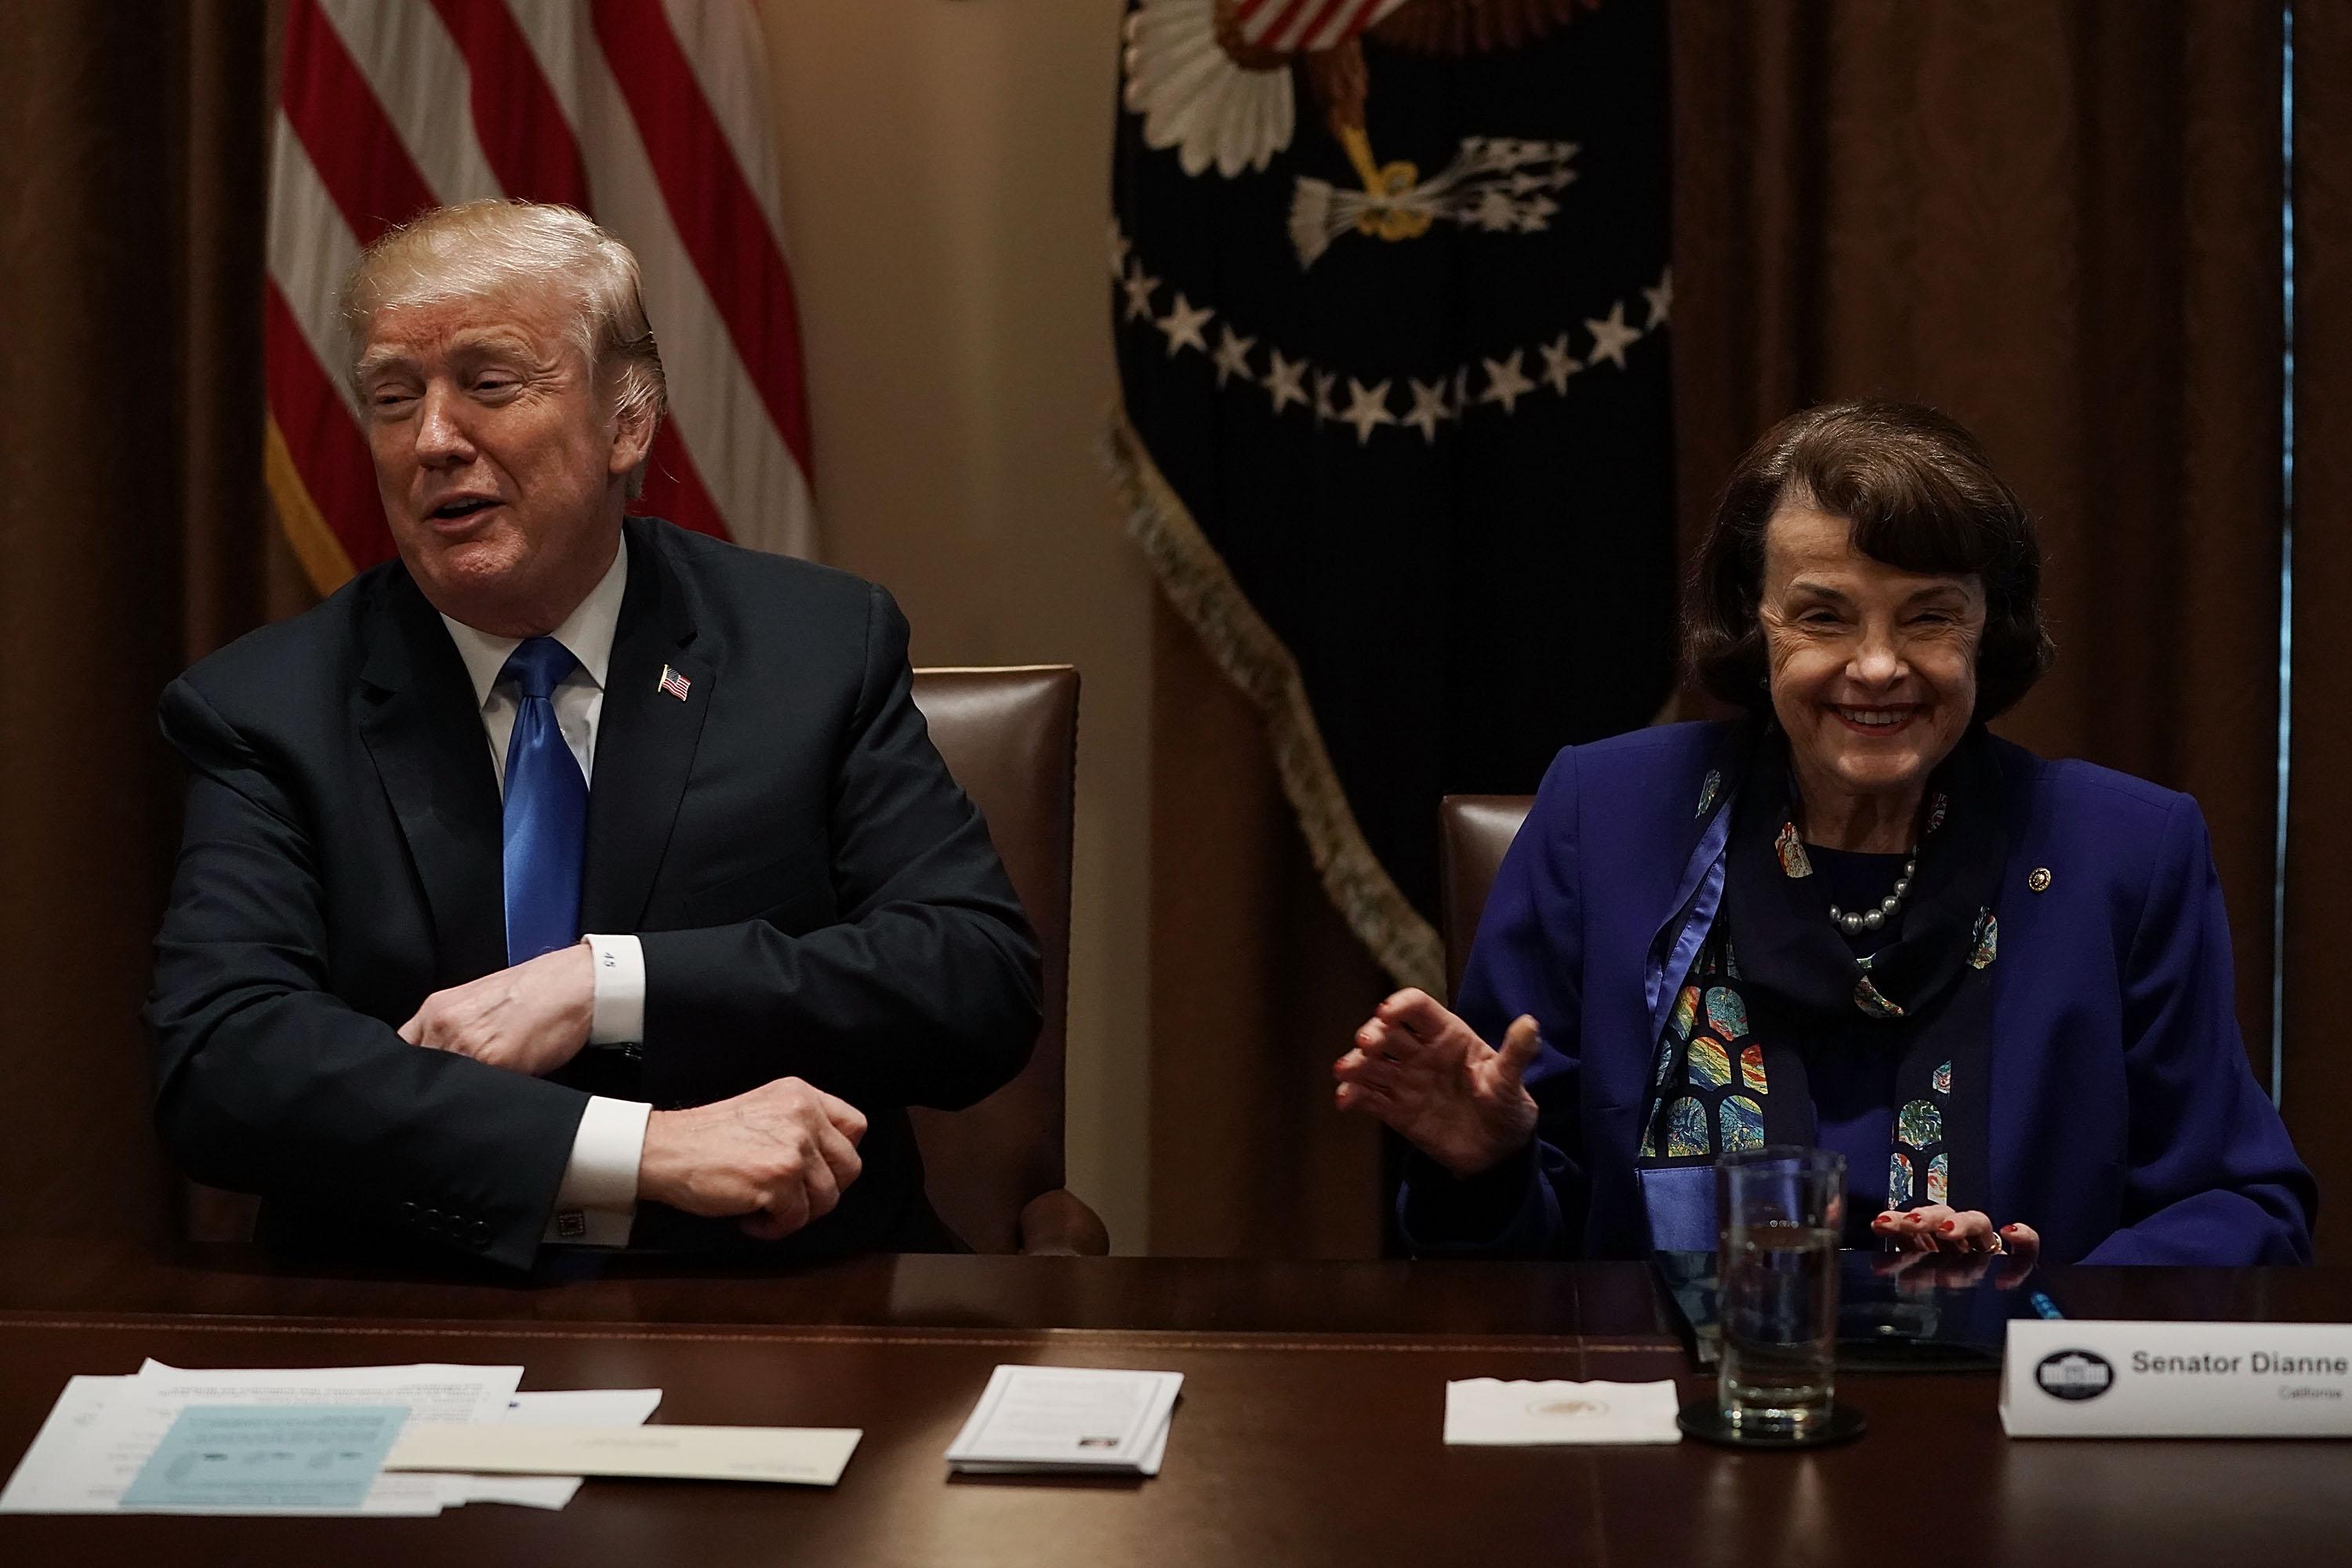 WASHINGTON, DC - FEBRUARY 28:  U.S. U.S. President Donald Trump (L) and Sen. Dianne Feinstein (D-CA) (R) share a moment during a meeting with bipartisan members of the Congress at the Cabinet Room of the White House February 28, 2018 in Washington, DC. President Trump held a meeting with lawmakers to discuss school and community safety.  (Photo by Alex Wong/Getty Images)